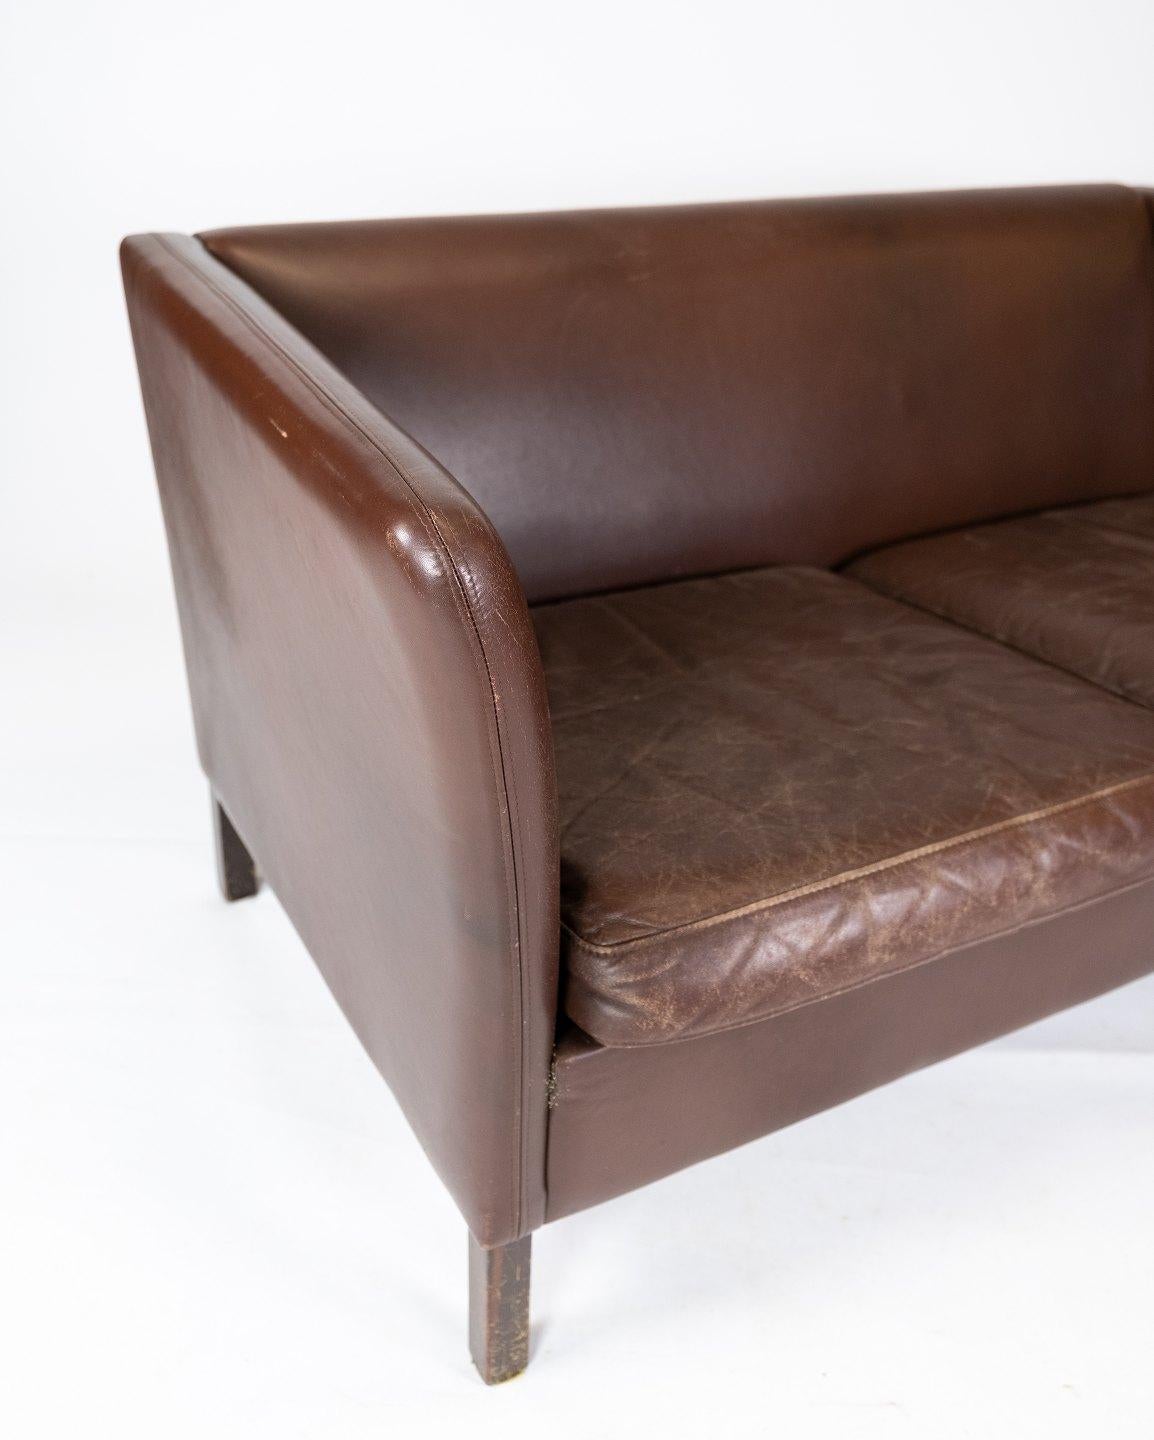 Two seater sofa upholstered with dark brown leather of Danish design manufactured by Stouby Furniture in the 1960s. The sofa is in great vintage condition.
  